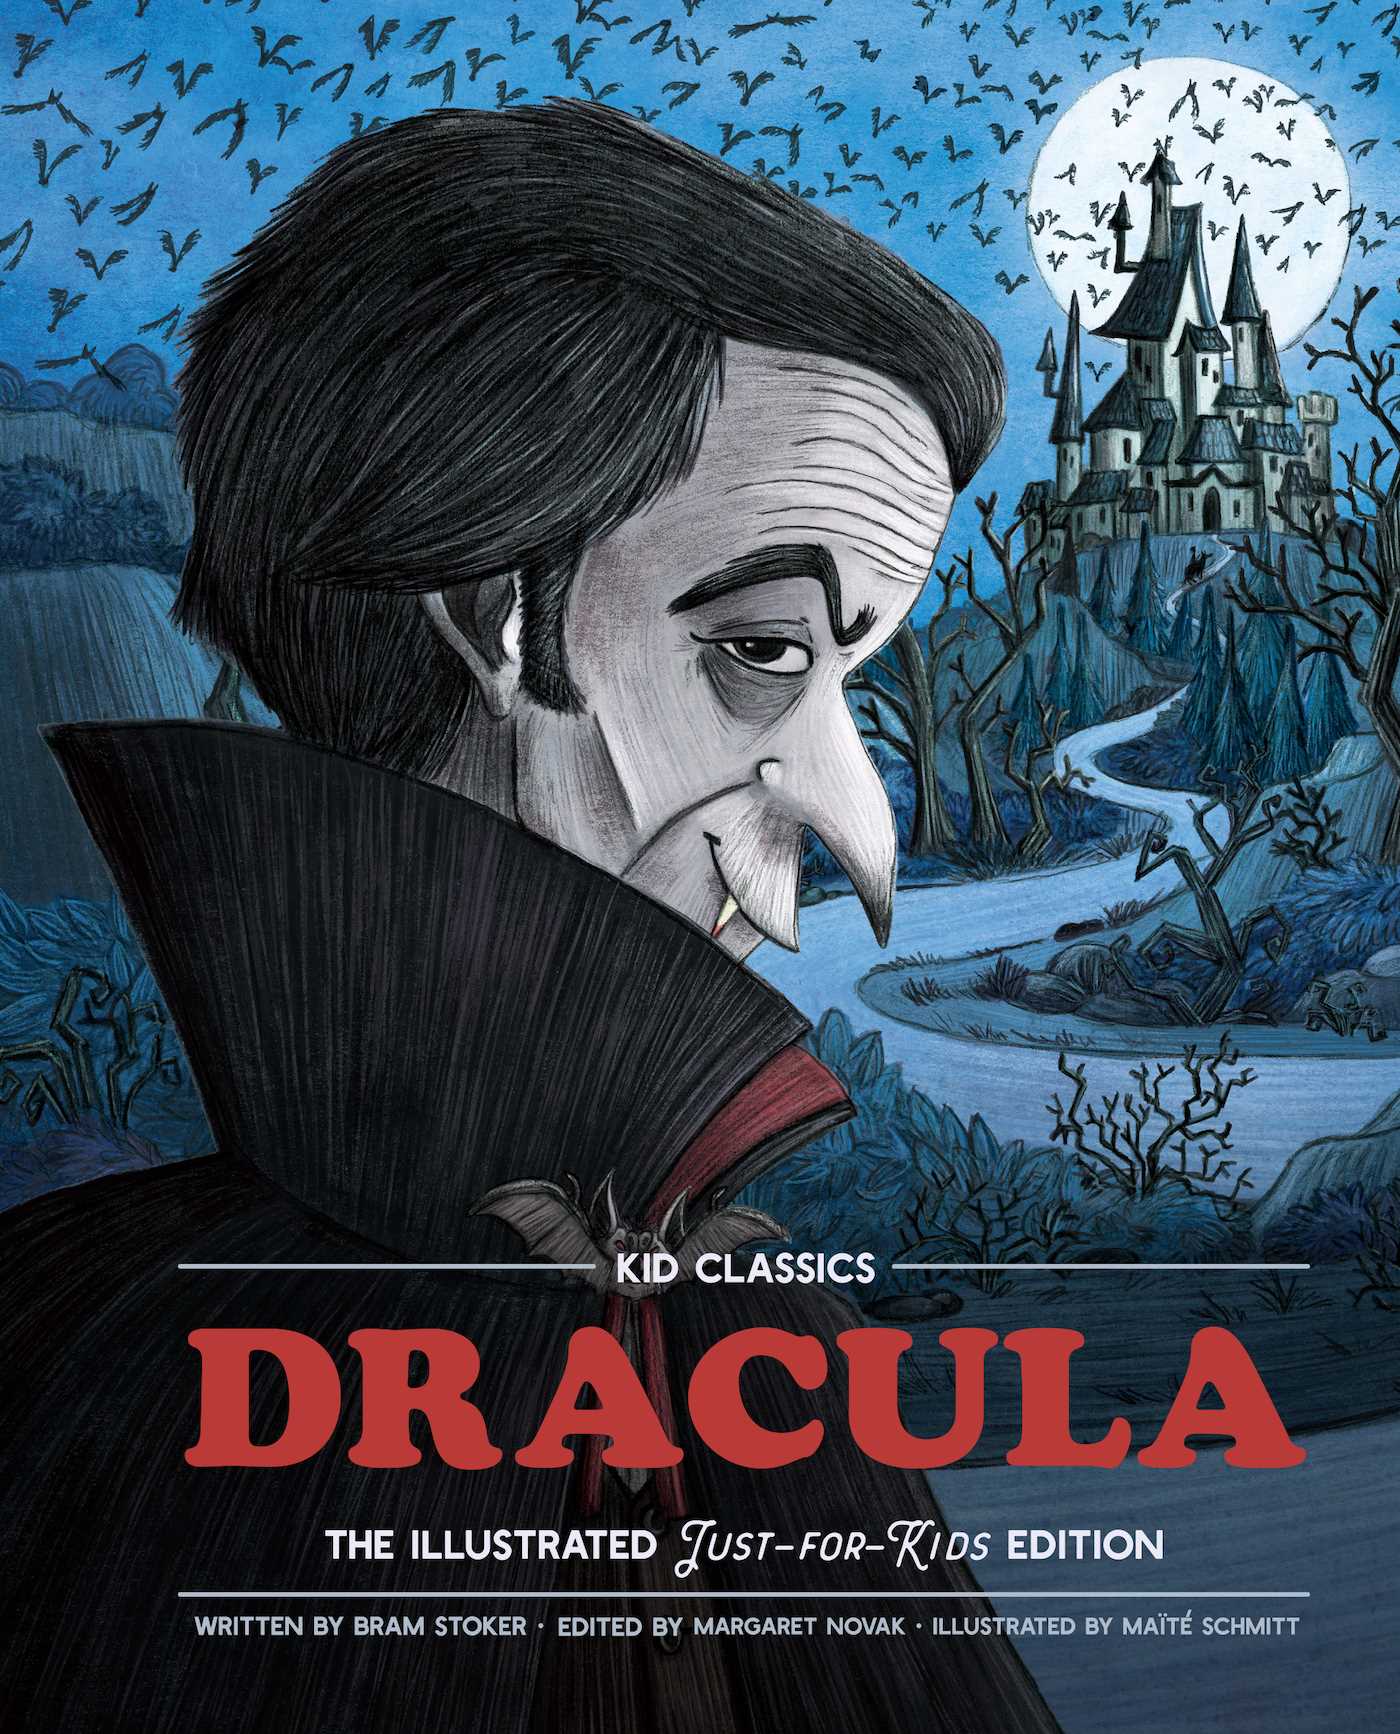 Dracula - Kid Classics : The Classic Edition Reimagined Just-for-Kids! (Kid Classic #2)